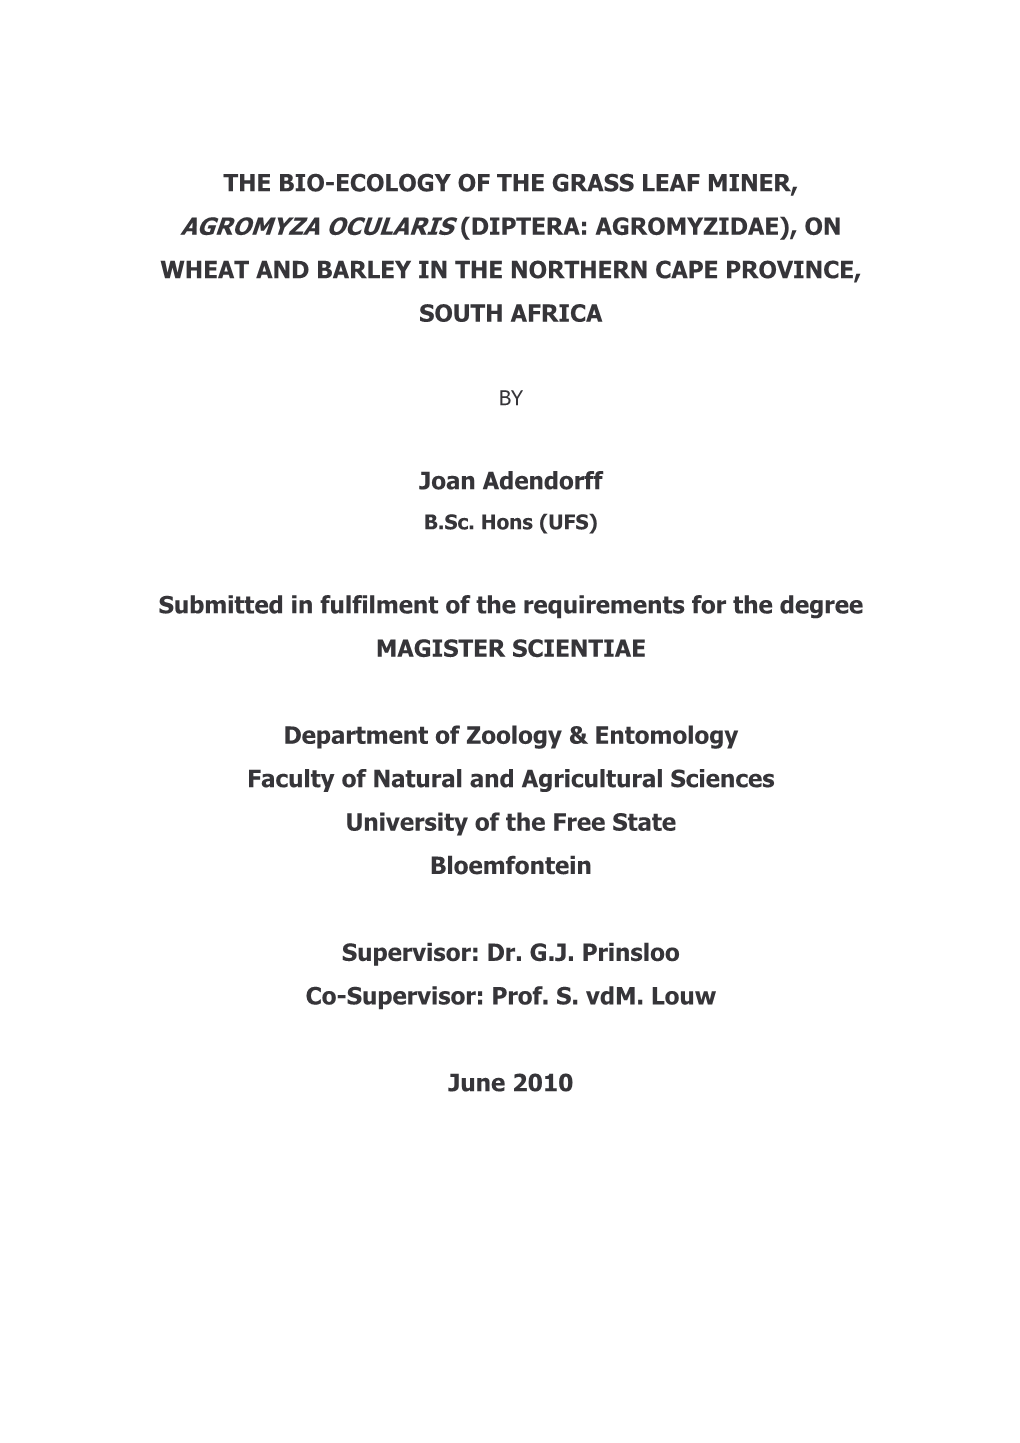 The Bio-Ecology of the Grass Leaf Miner, Agromyza Ocularis (Diptera: Agromyzidae), on Wheat and Barley in the Northern Cape Province, South Africa